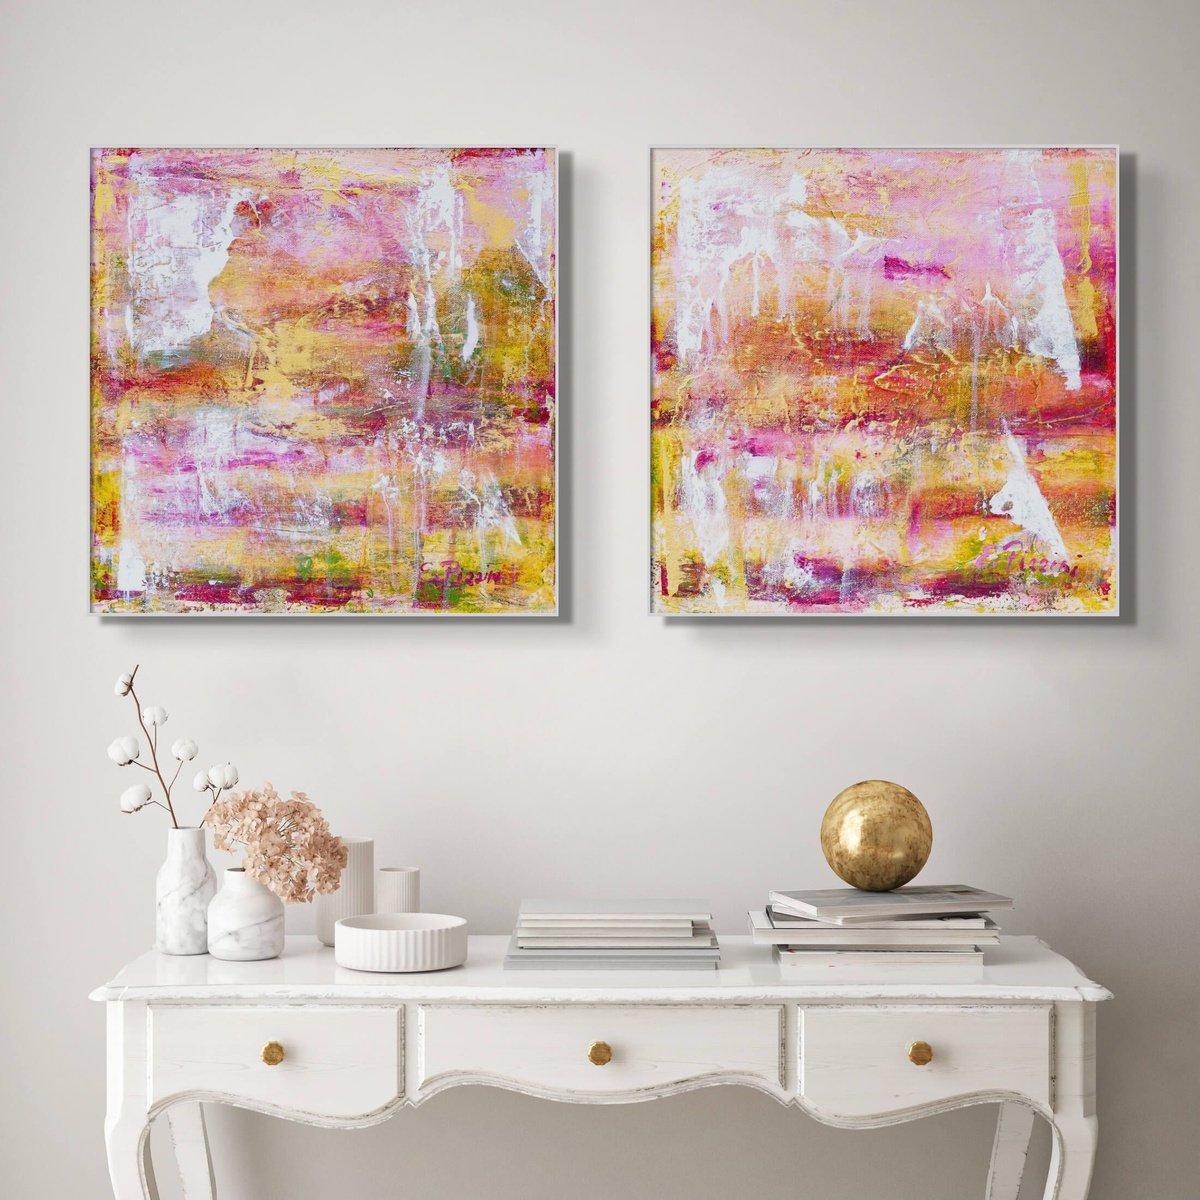 Sunset in Rome - Diptych (30x60 cm) by Elide Pizzini